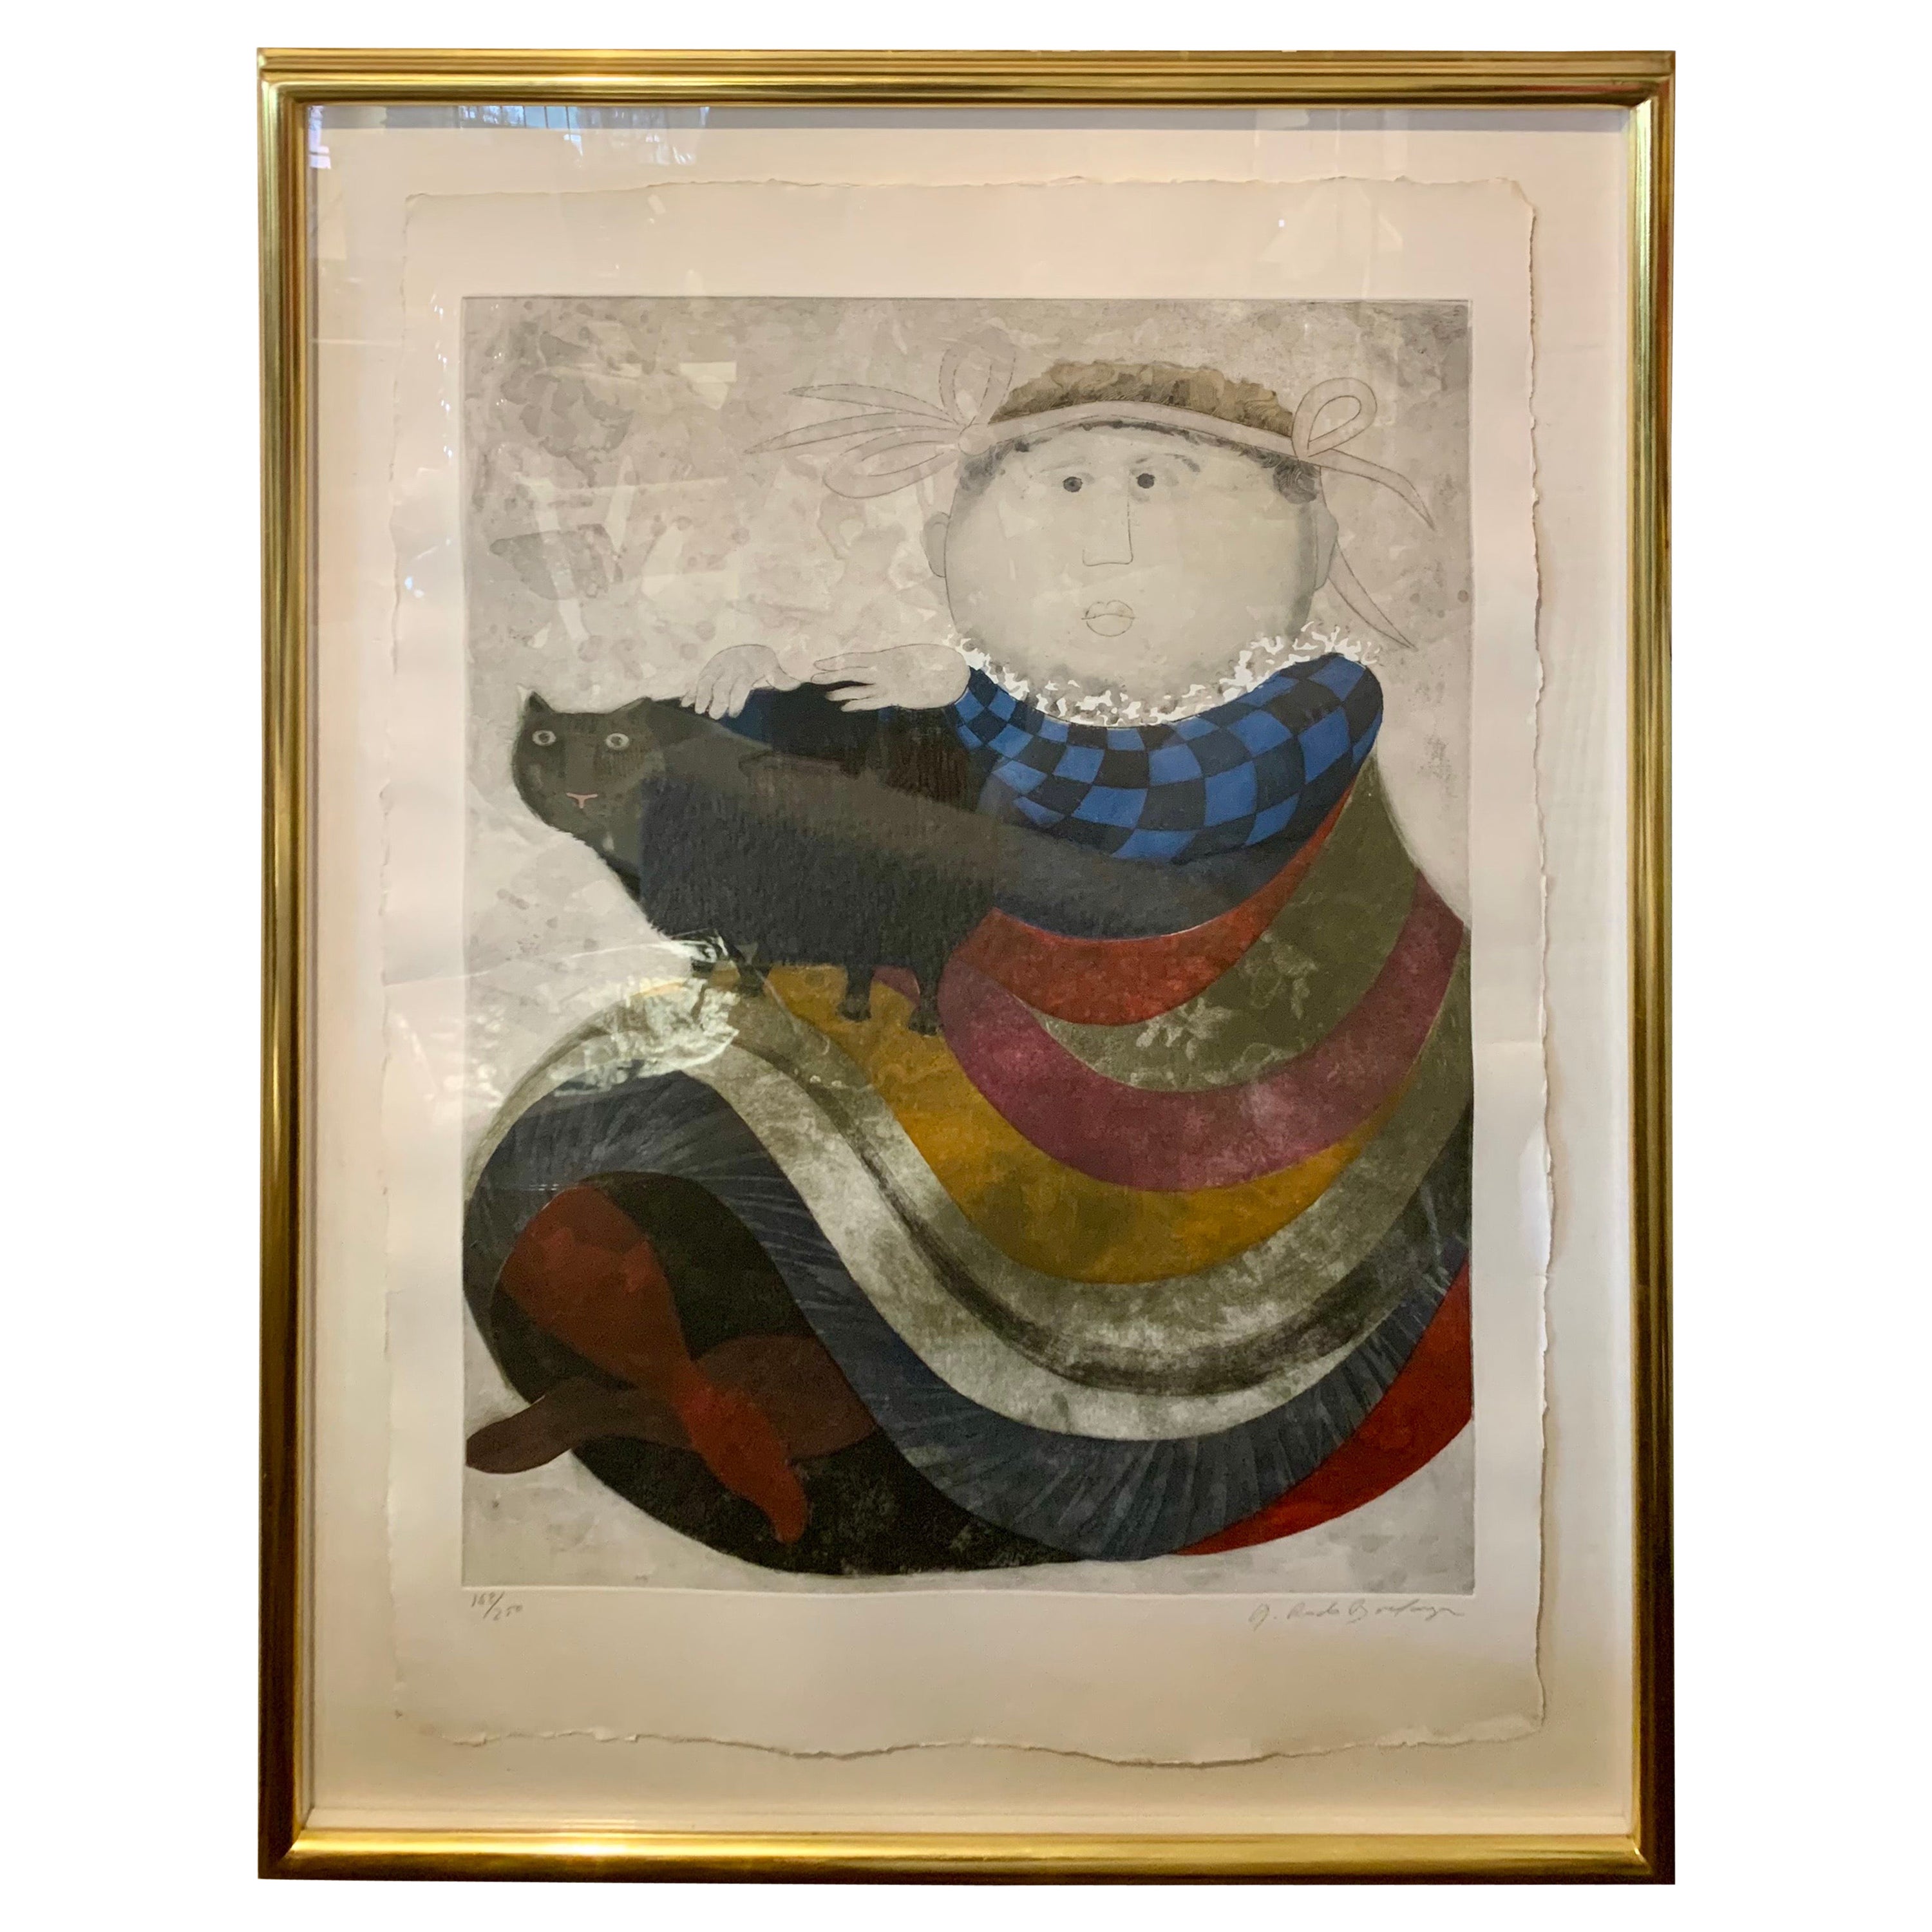 Graciela Rodo Boulanger Signed and Numbered Limited Edition Lithograph